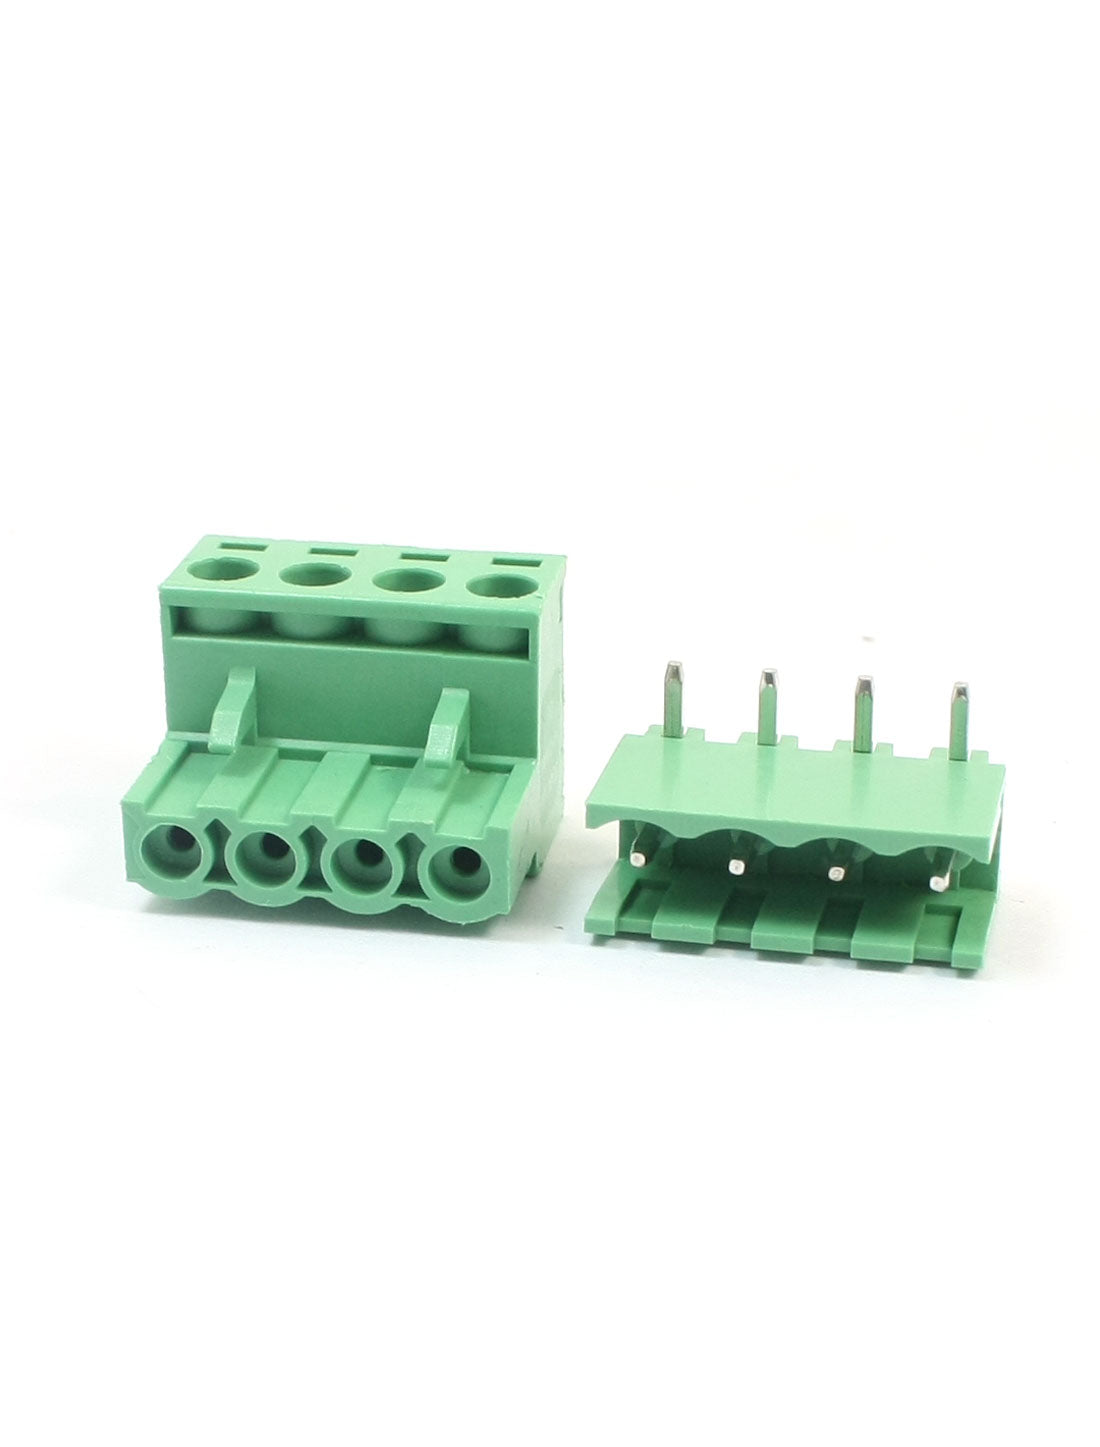 uxcell Uxcell 300V 16A 14-22AWG 5.08mm Pitch 4-Pin 4-Position Pluggable Type PCB Mounting Blue Plastic Screw Terminal Block Connector 10 Pcs